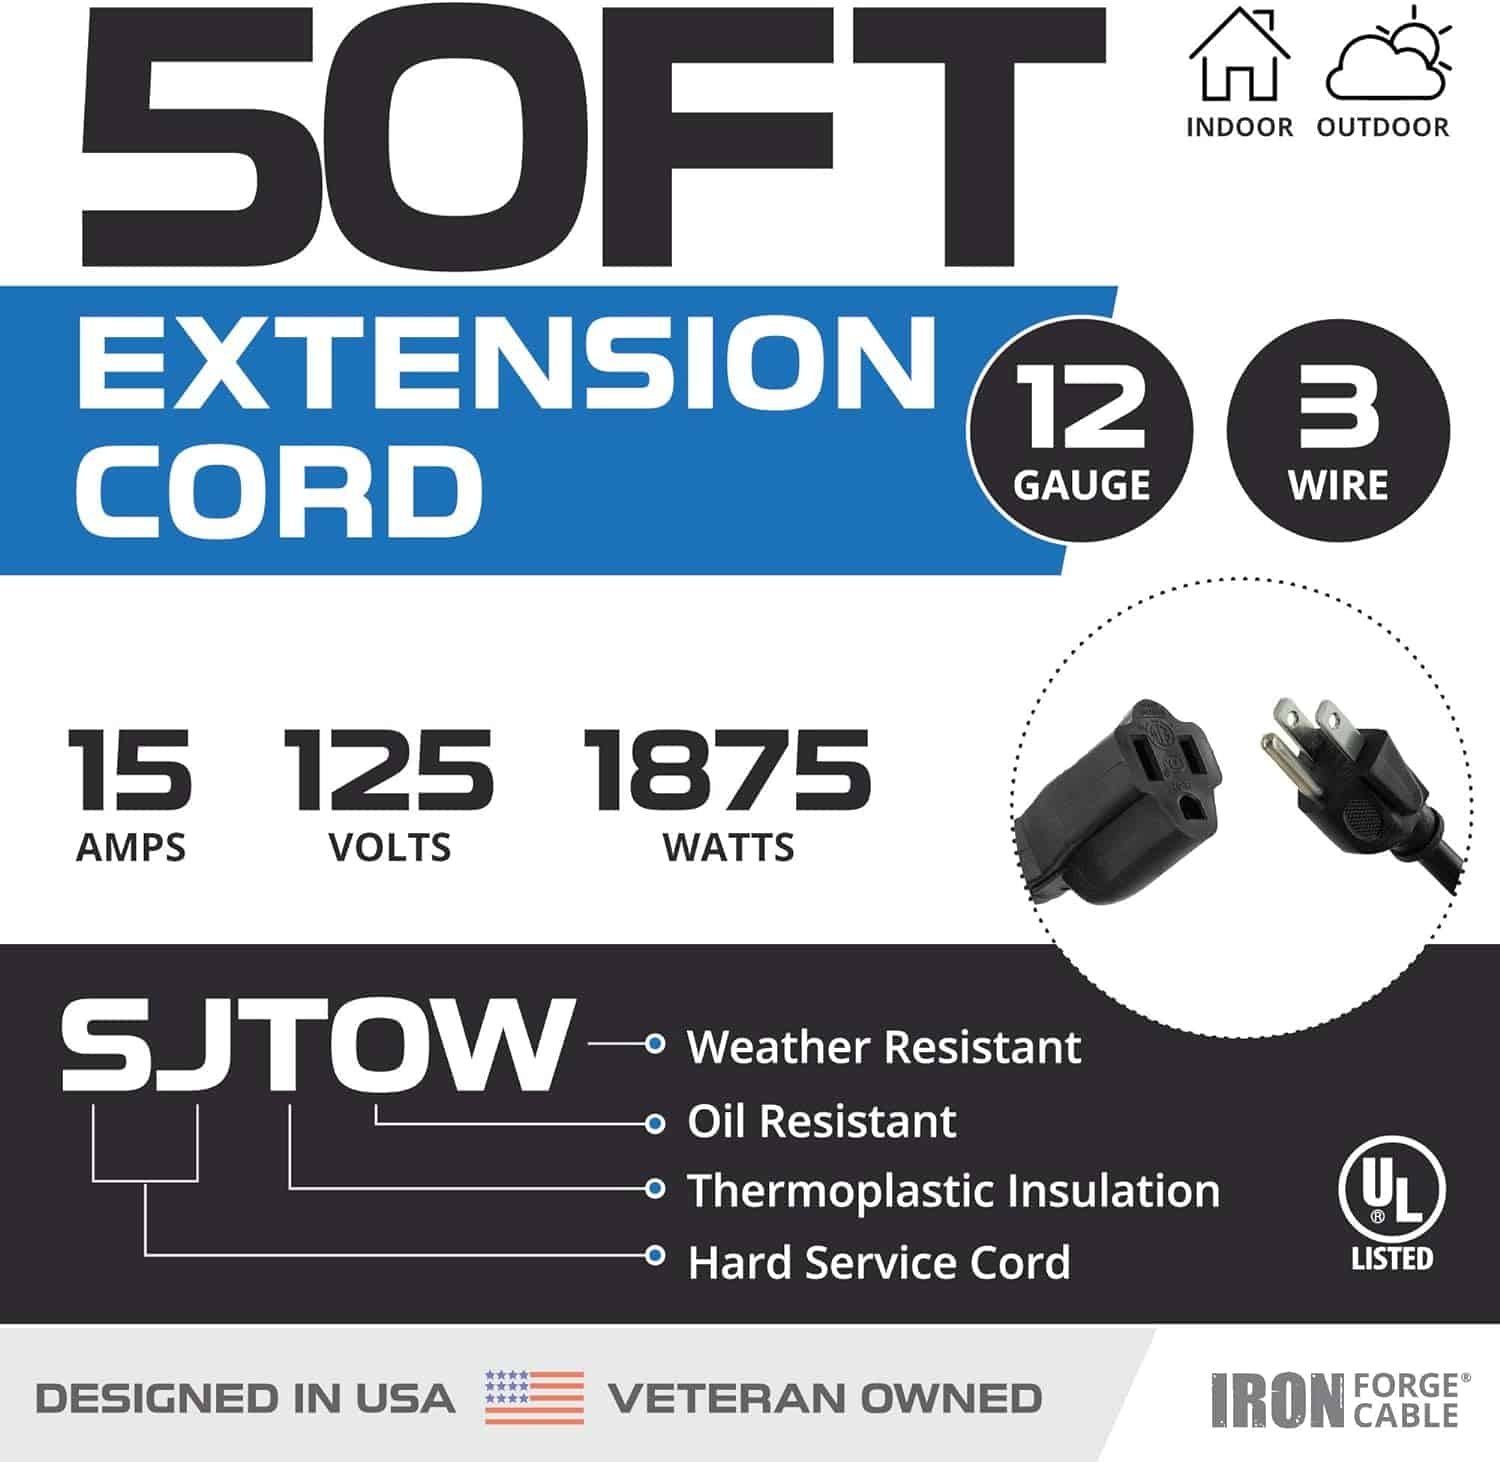 Iron Forge Cable Black Extension Cord 50 Ft Oil Resistant for Farms and Ranches – 12 3 SJTOW Heavy Duty Outdoor Extension Cord with 3 Prong Plug for Safety, 15 AMP Power Cable for Heavy Appliances 2